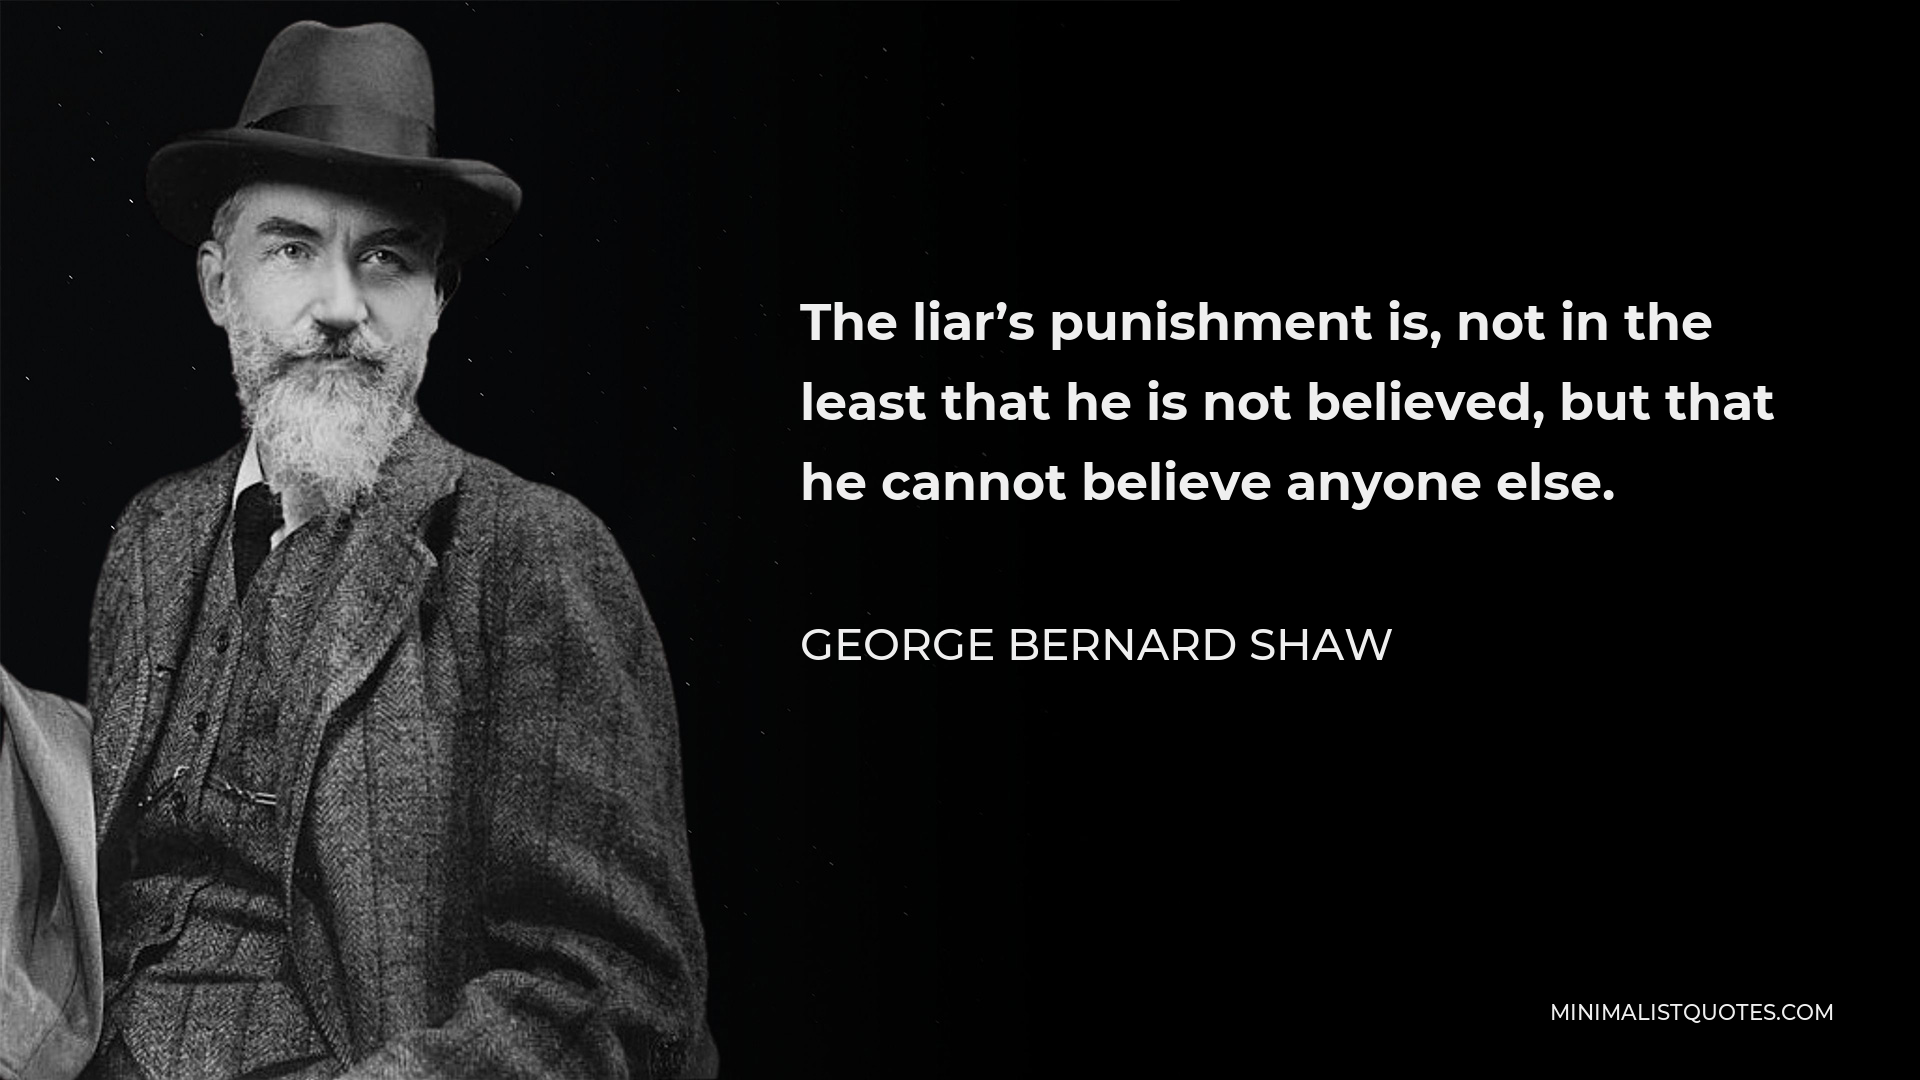 George Bernard Shaw Quote - The liar’s punishment is, not in the least that he is not believed, but that he cannot believe anyone else.